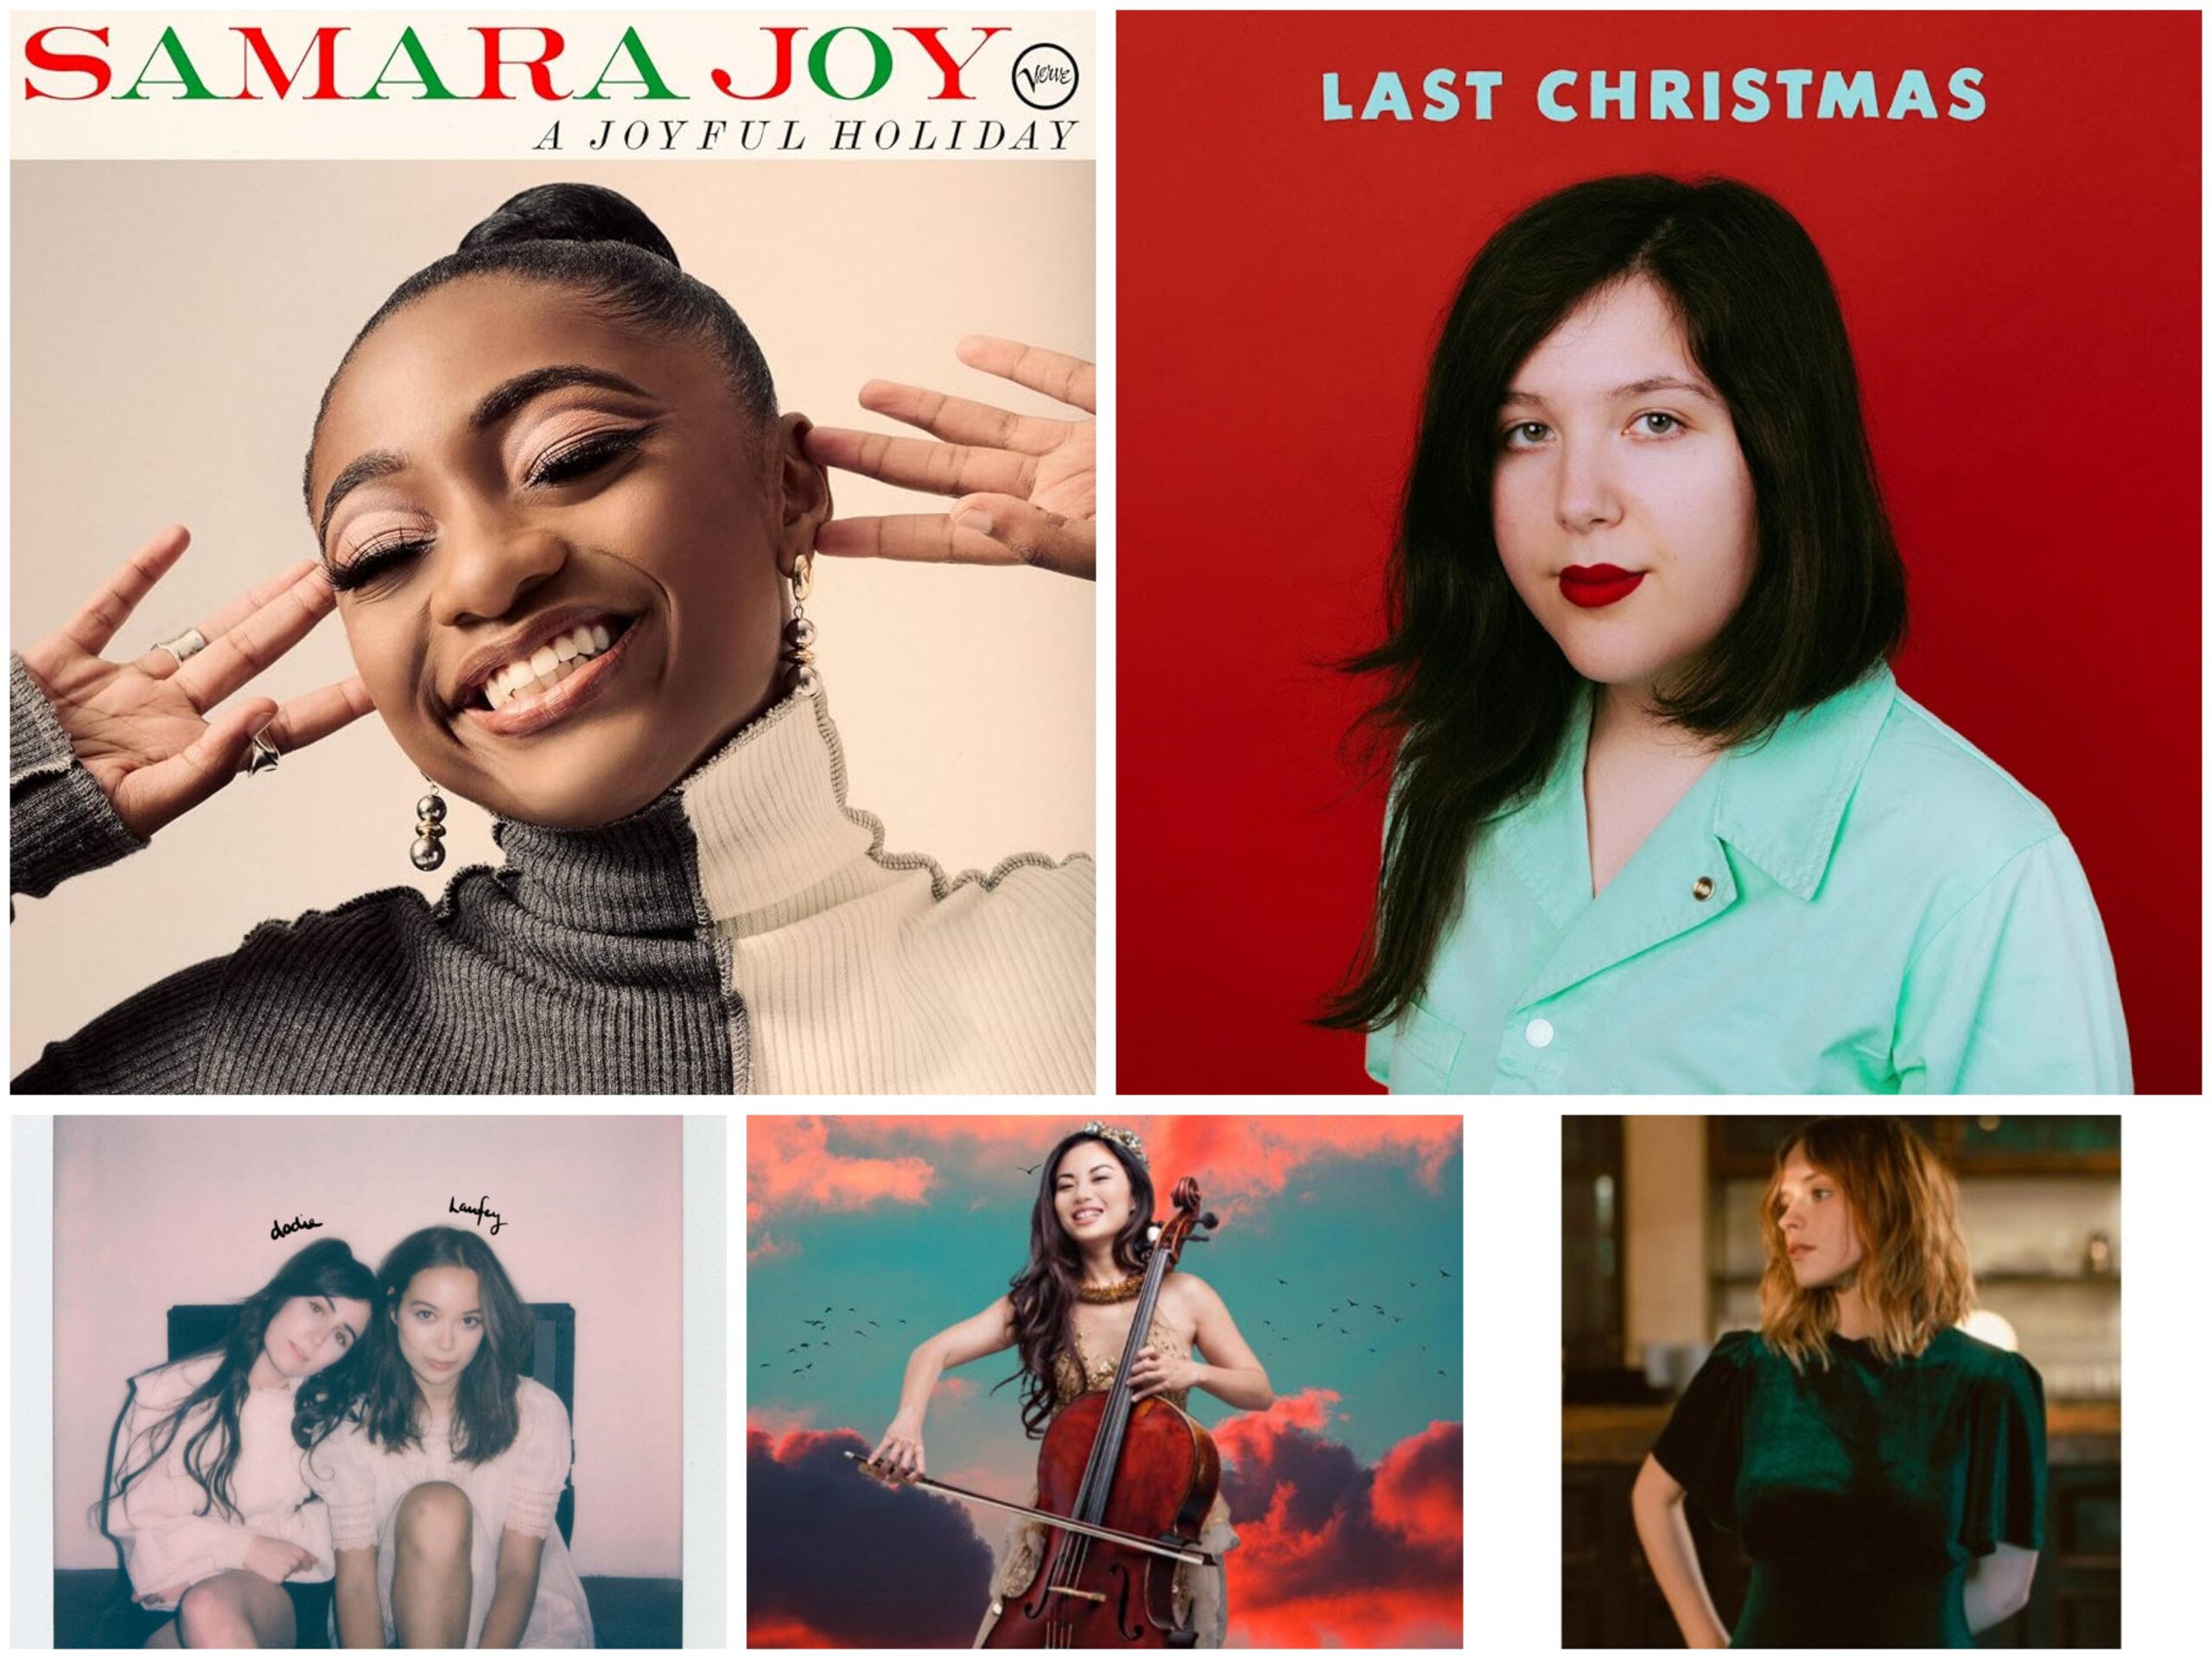 Get Ready to Deck the Halls With This Festive Holiday Playlist